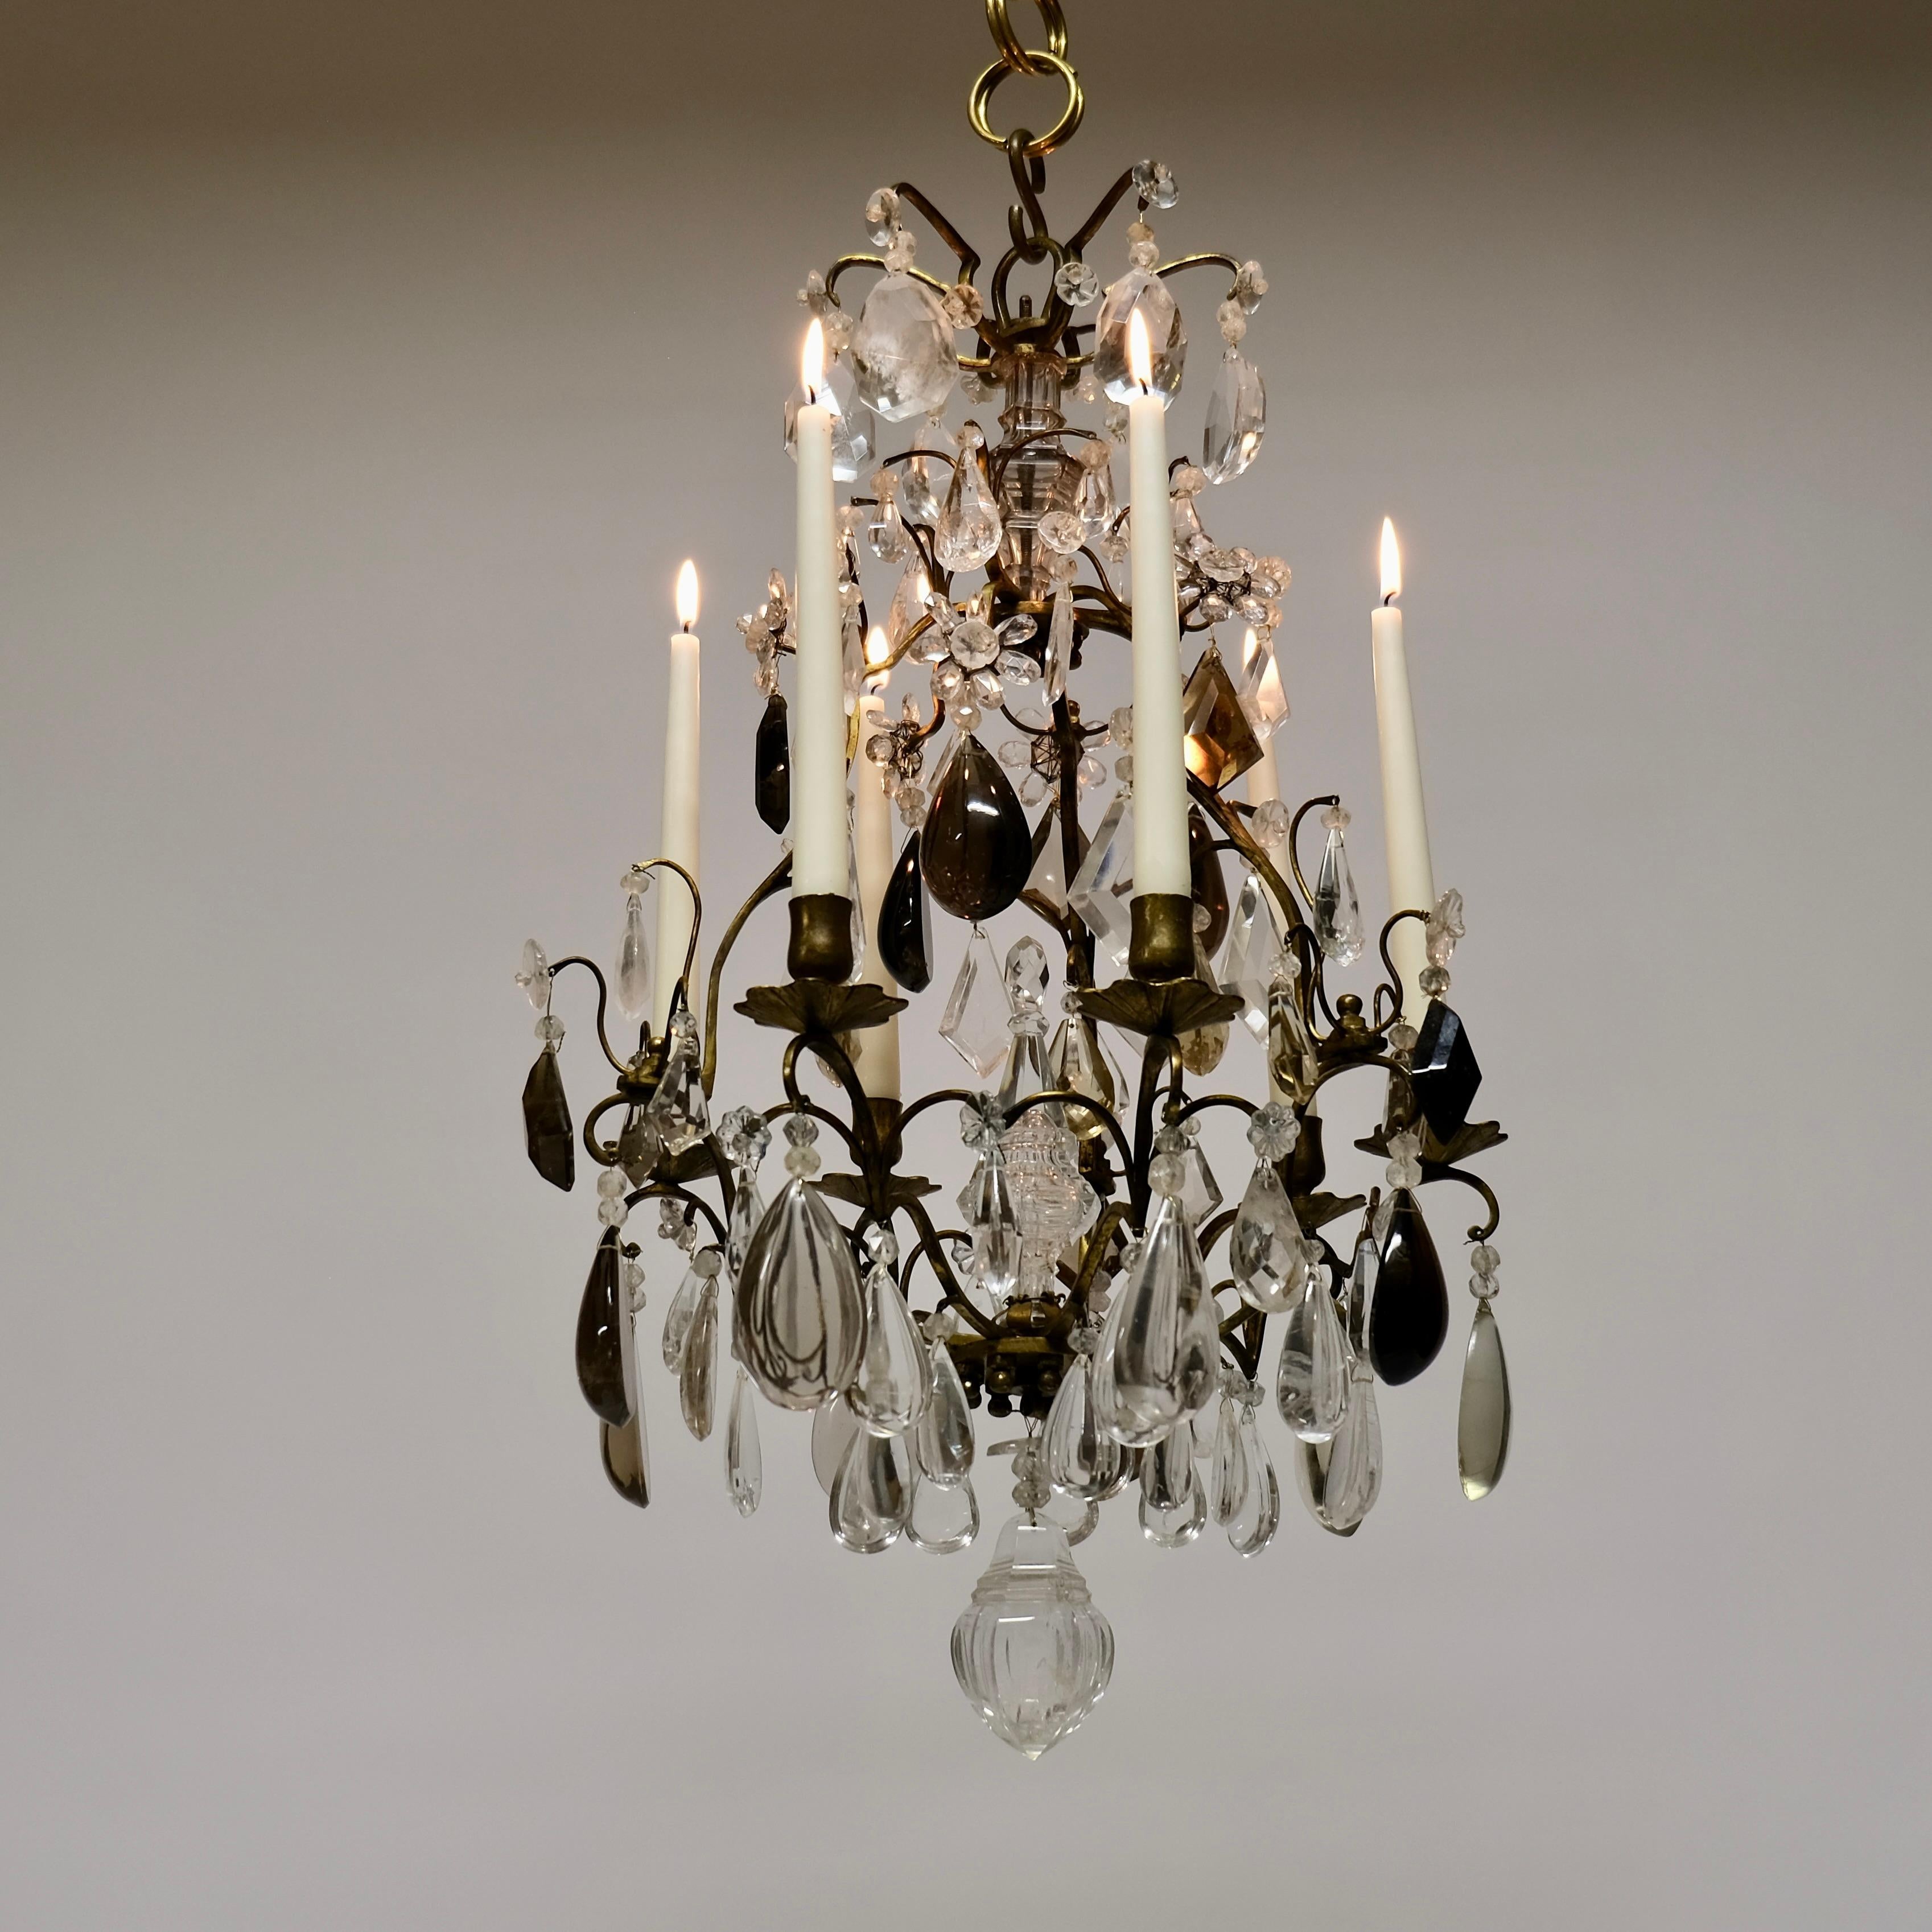 Small Baroque Style Chandelier with Exquisite Rock Crystals. 19th c. 6